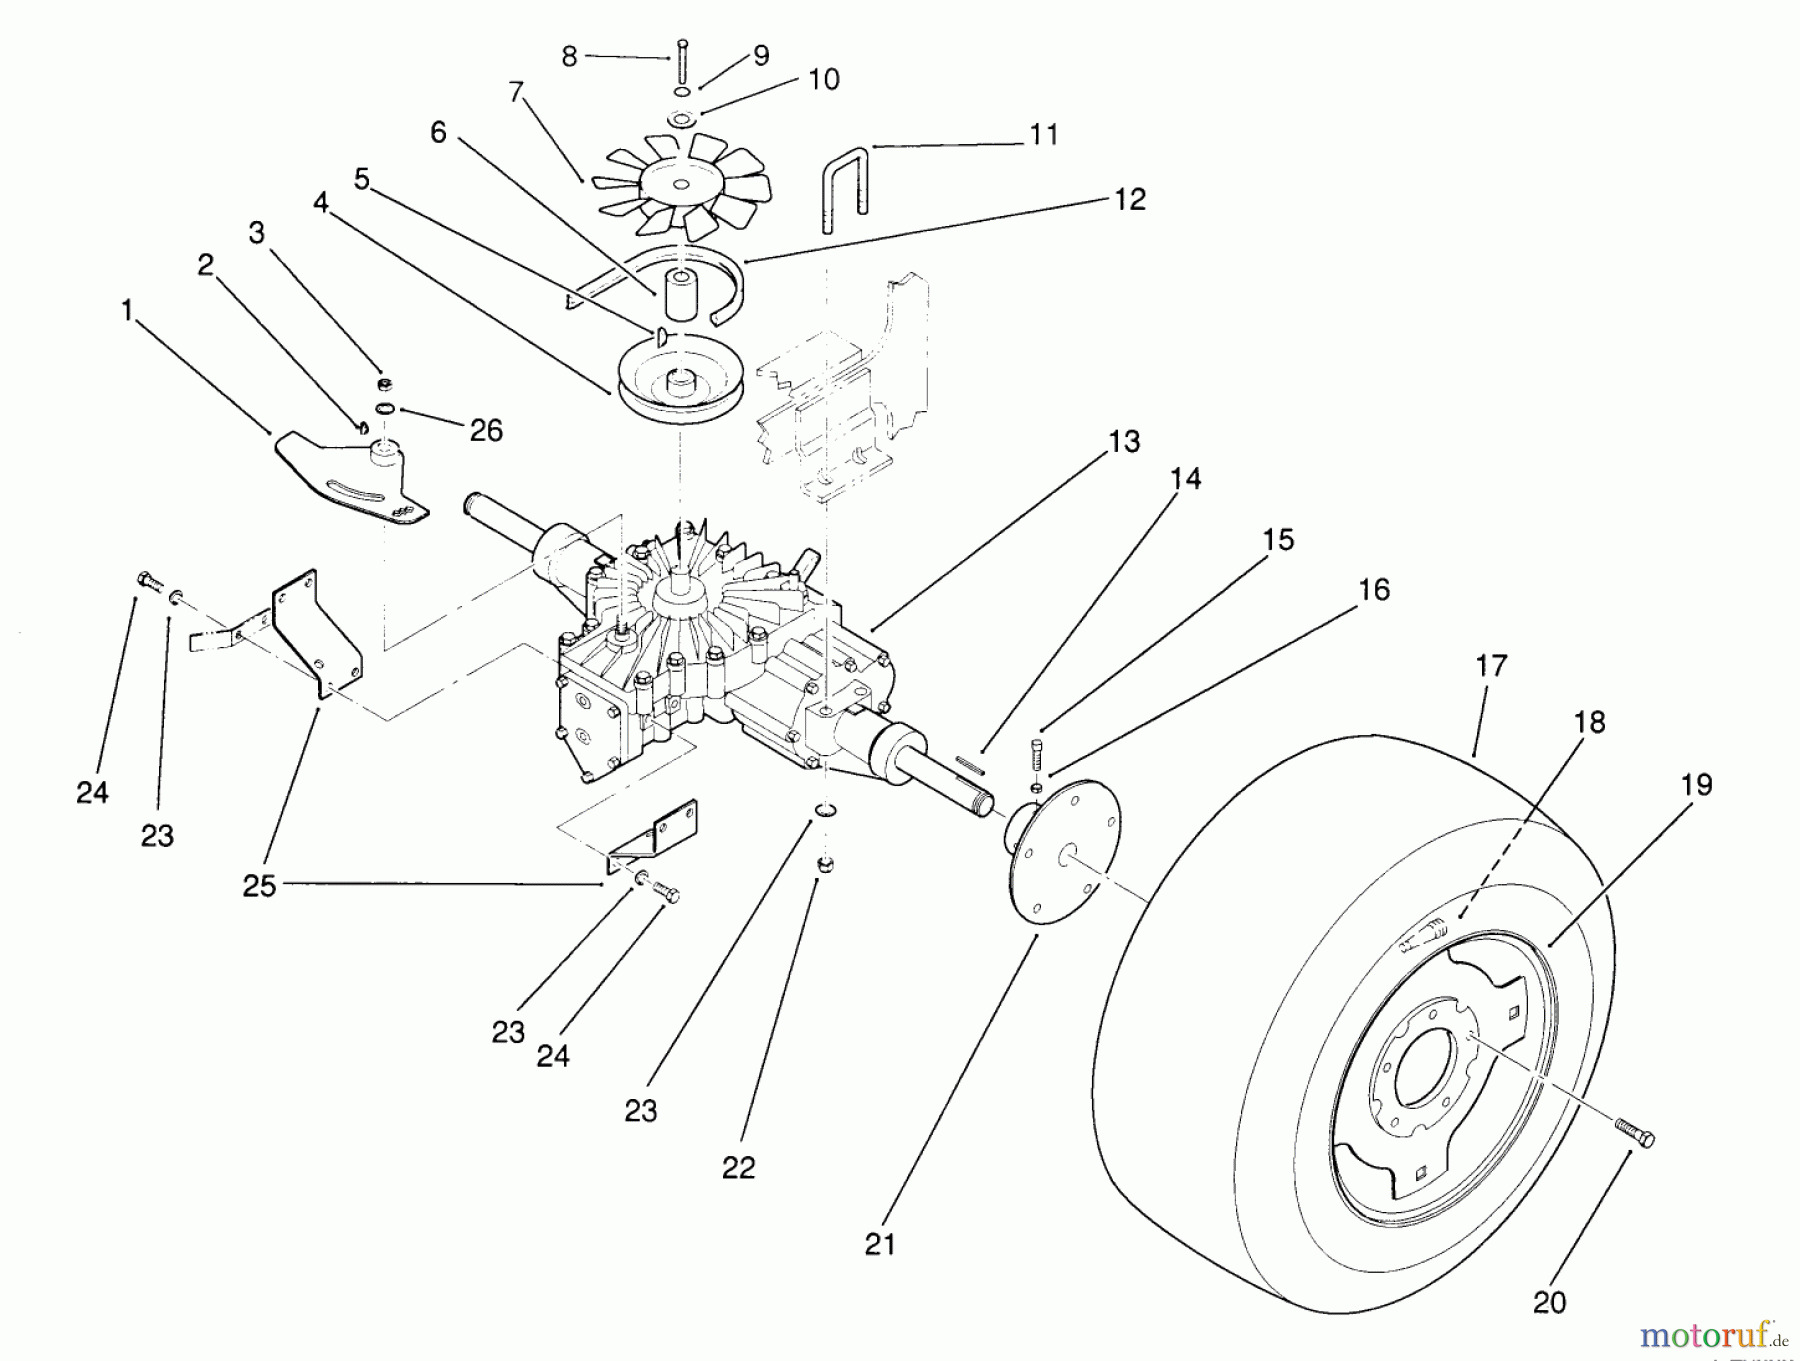  Toro Neu Mowers, Lawn & Garden Tractor Seite 1 22-14OE01 (244-H) - Toro 244-H Yard Tractor, 1991 (1000001-1999999) REAR WHEEL AND TRANSMISSION ASSEMBLY